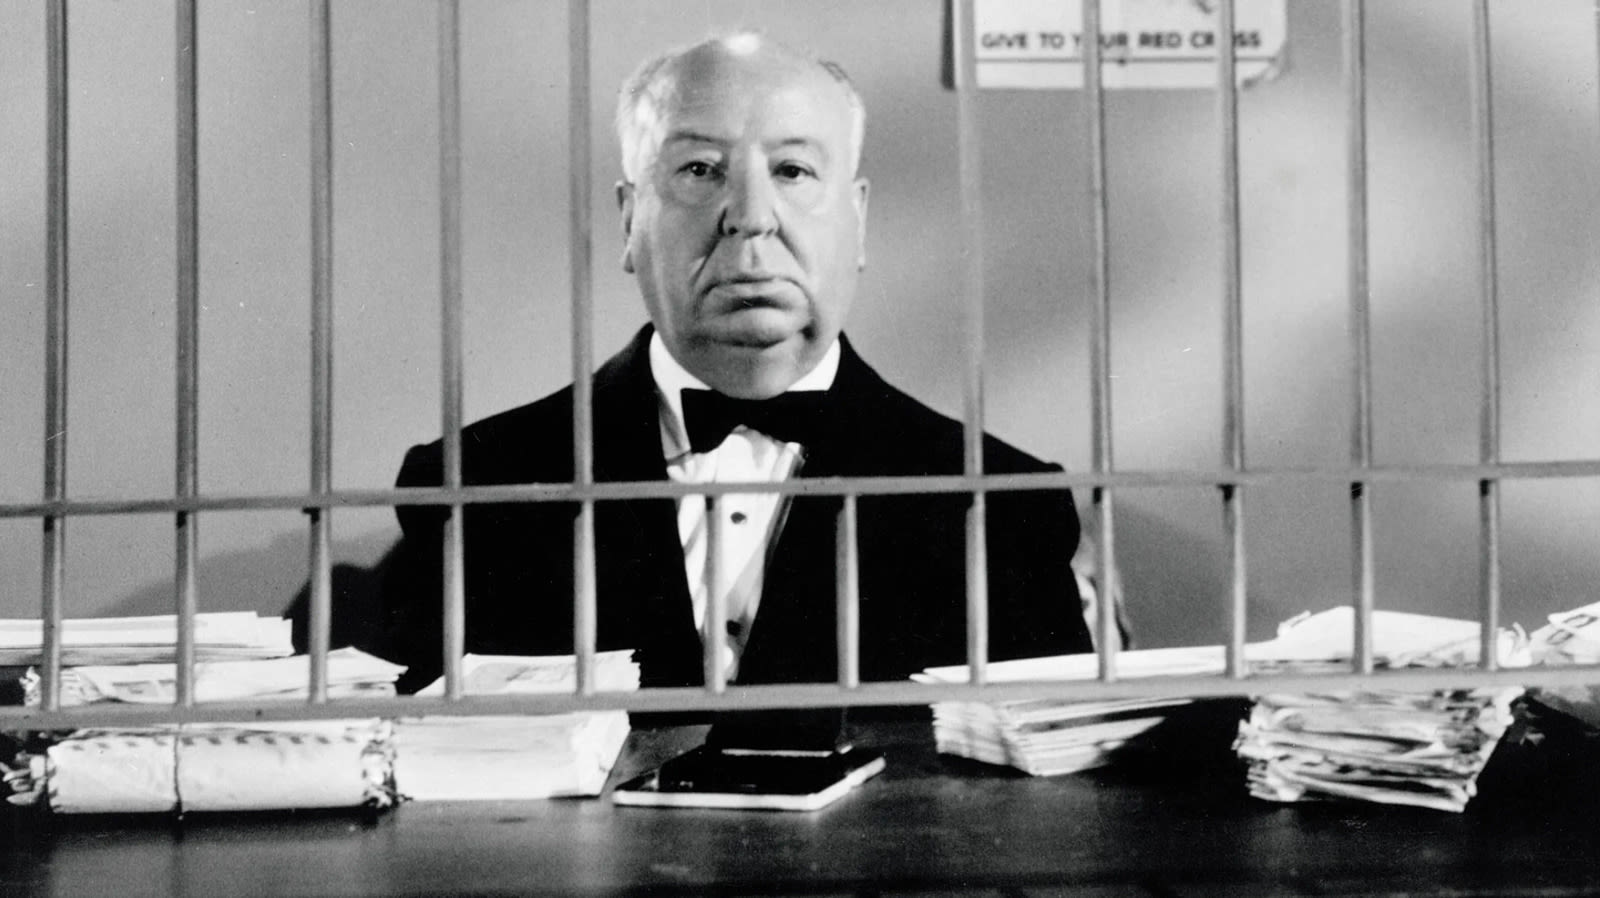 There Are Two Perfect Alfred Hitchcock Movies, According To Rotten Tomatoes - SlashFilm